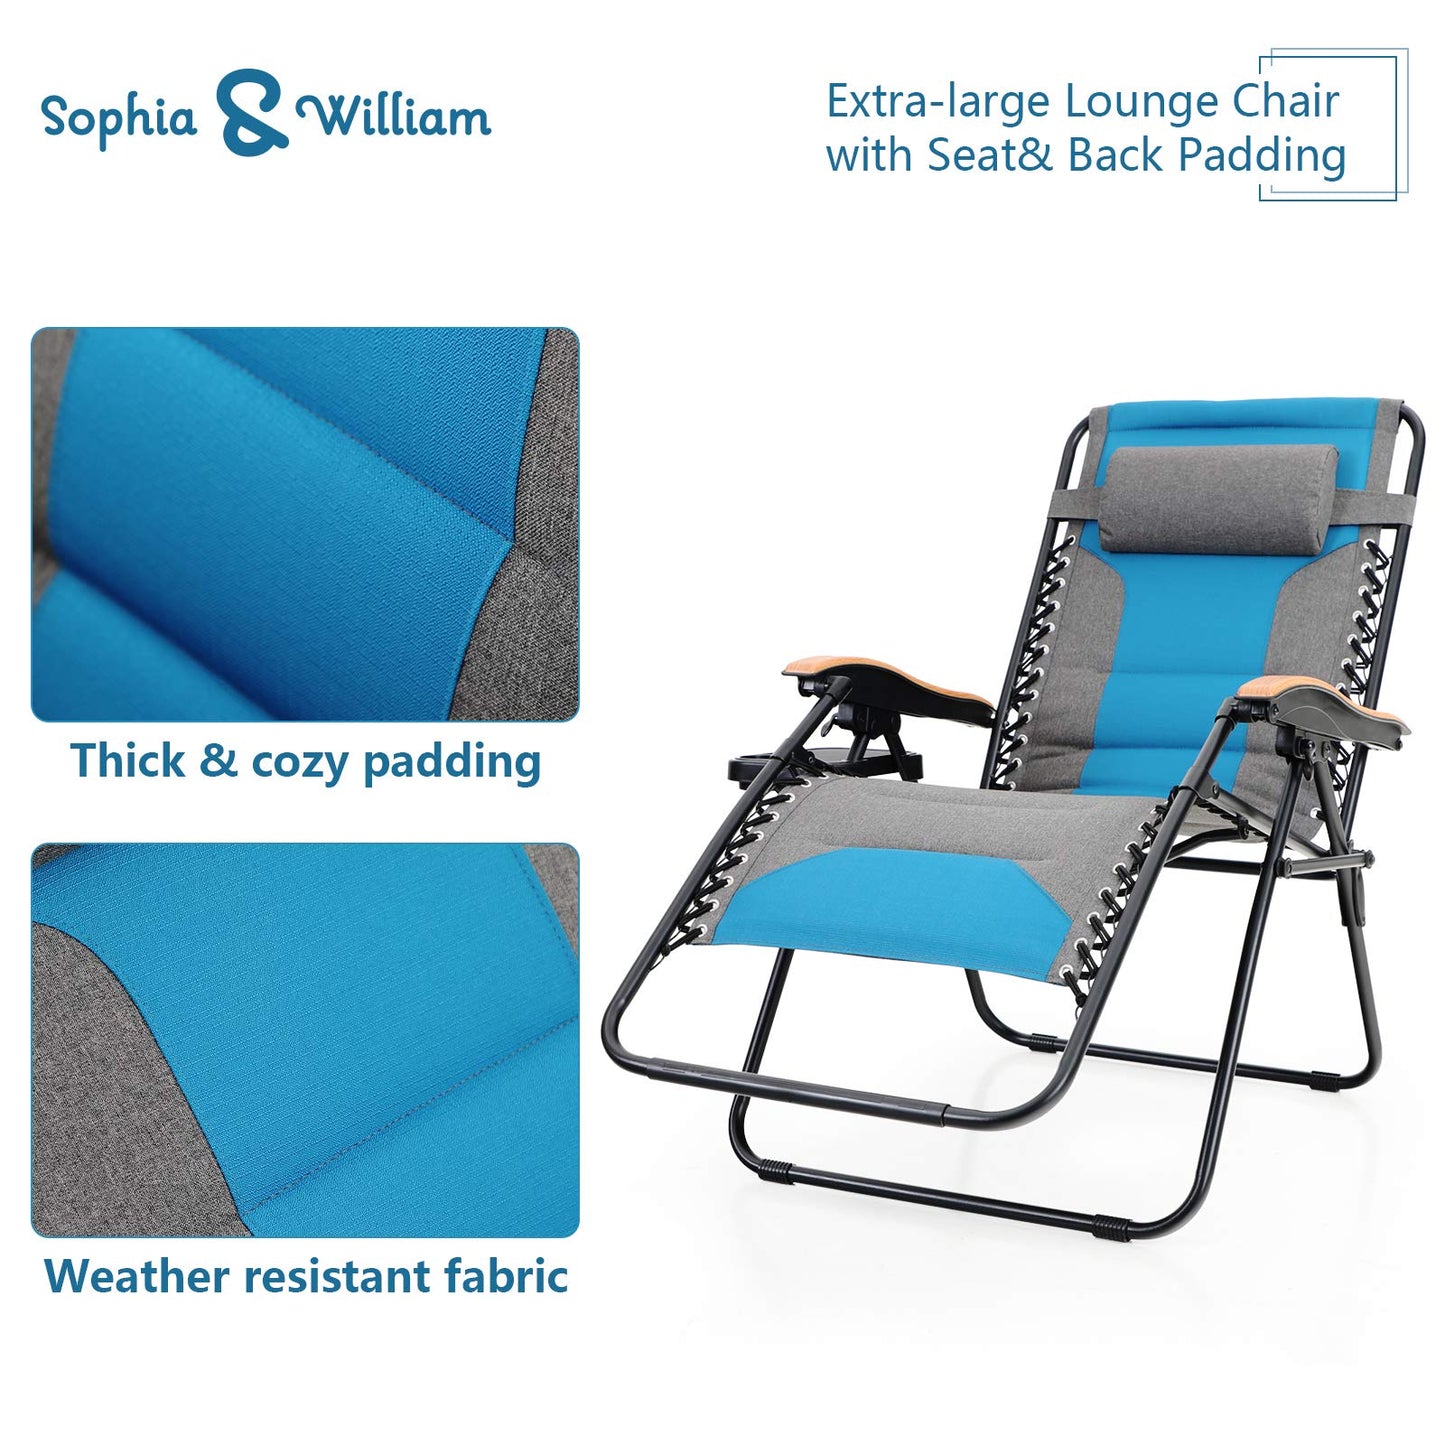 Sophia & William Padded Zero Gravity Chair Oversize Lounge Chair with Free Cup Holder, Supports 350 LBS (Cobalt Blue) 1 Pack Cobalt Blue